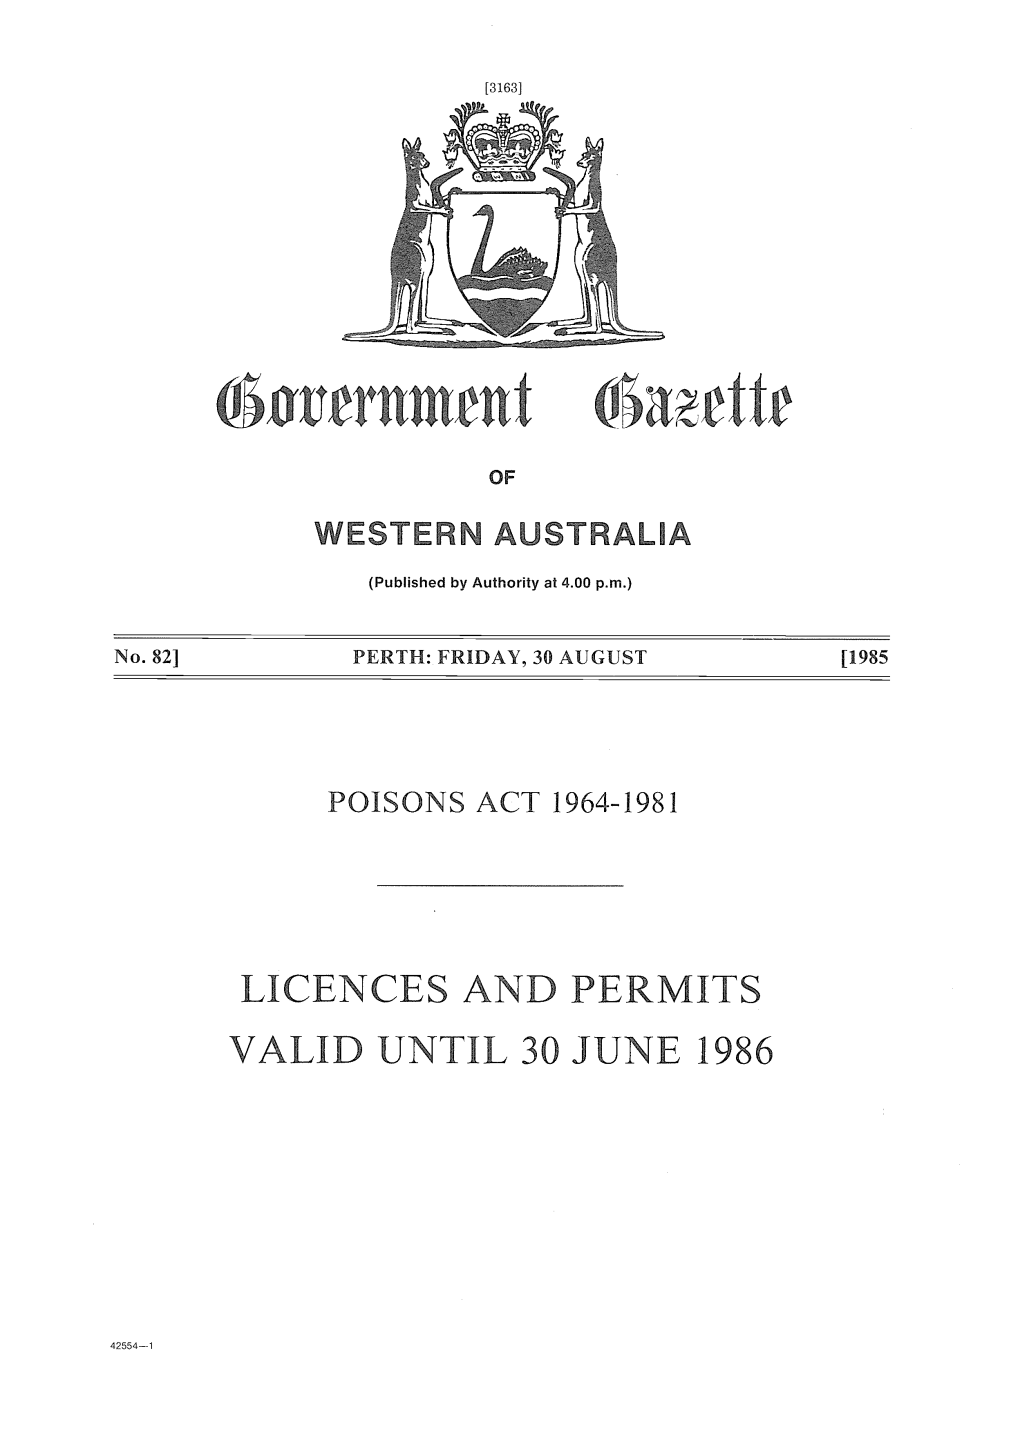 Licences and Permits Valid Until 30 June 1986